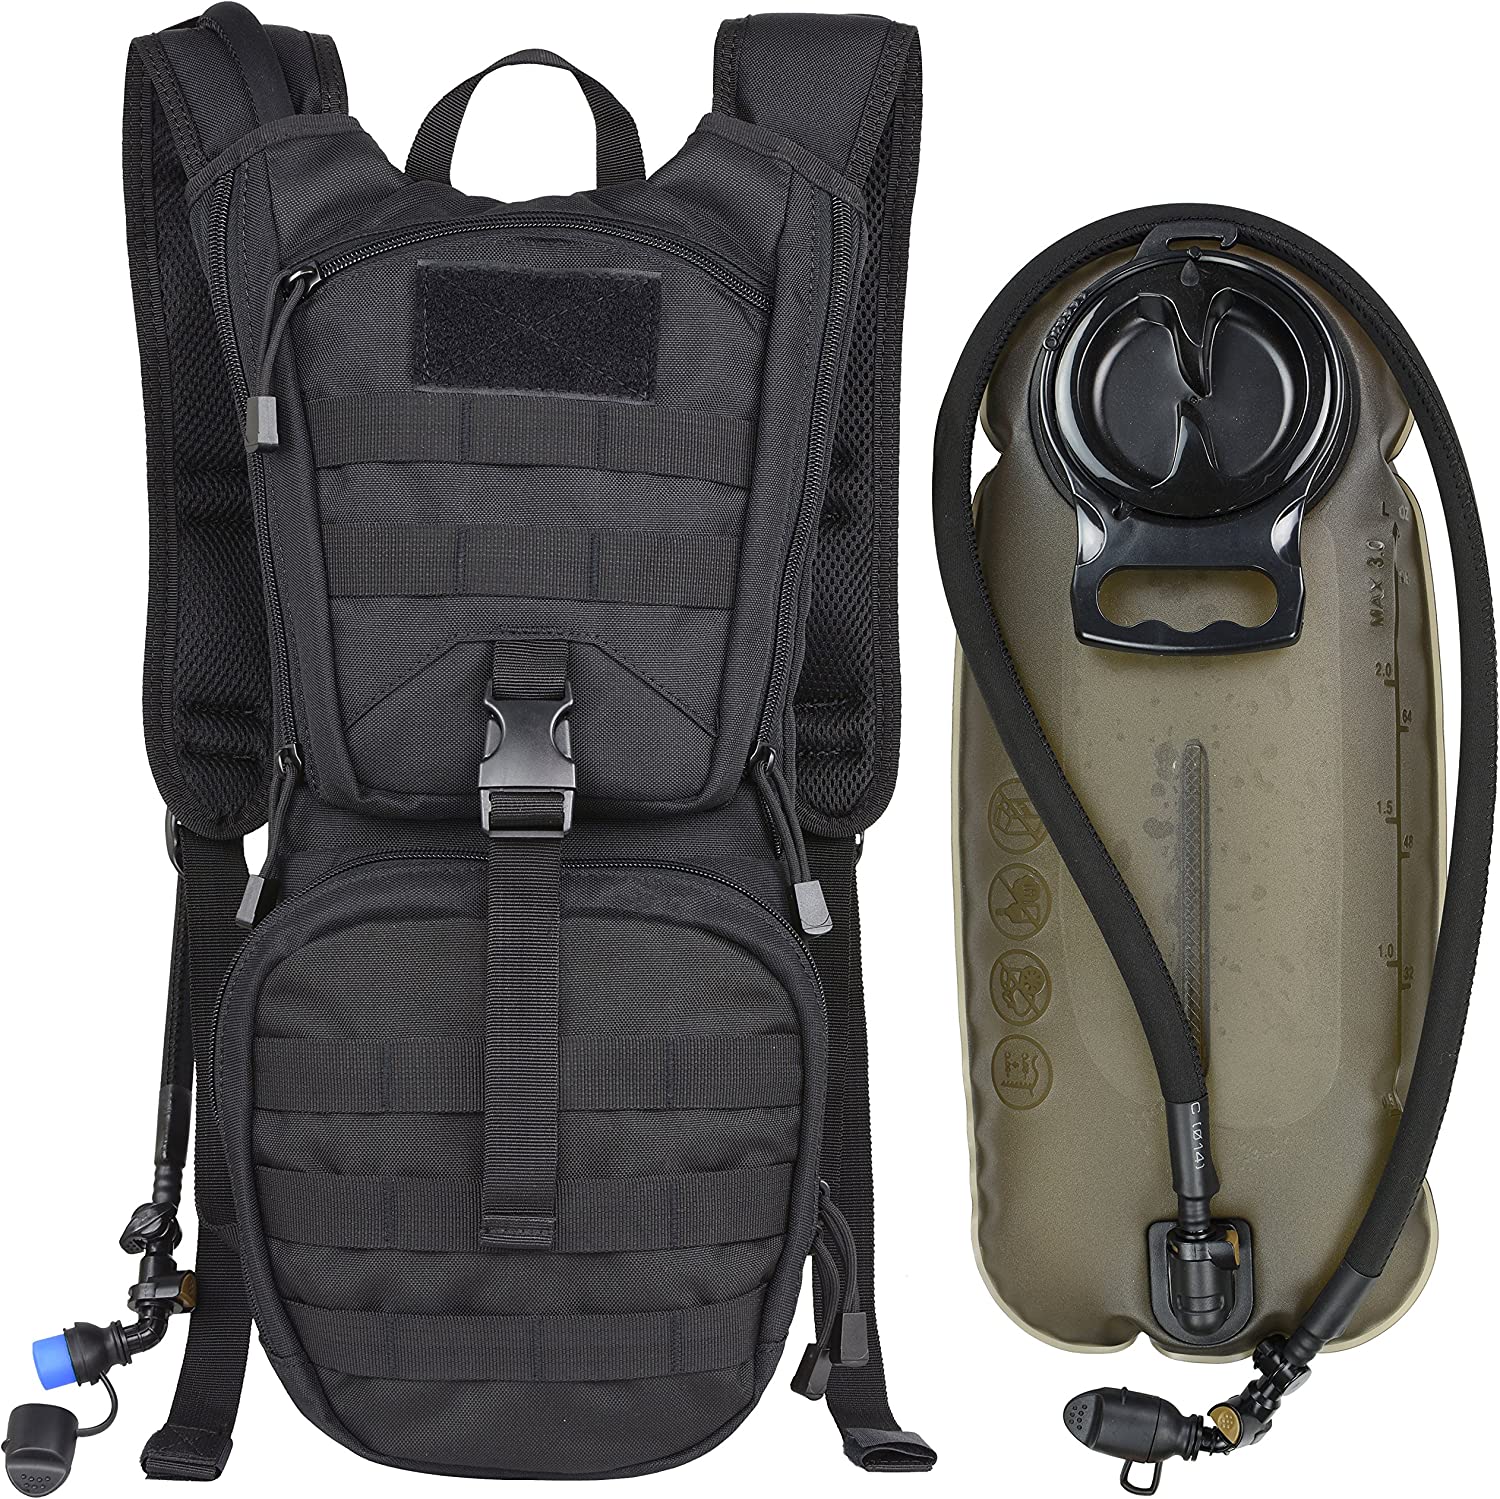 Tactical Hydration Backpack Pack with 3L BPA Free Water Bladder for Hiking, Climbing, Hunting - image 1 of 6